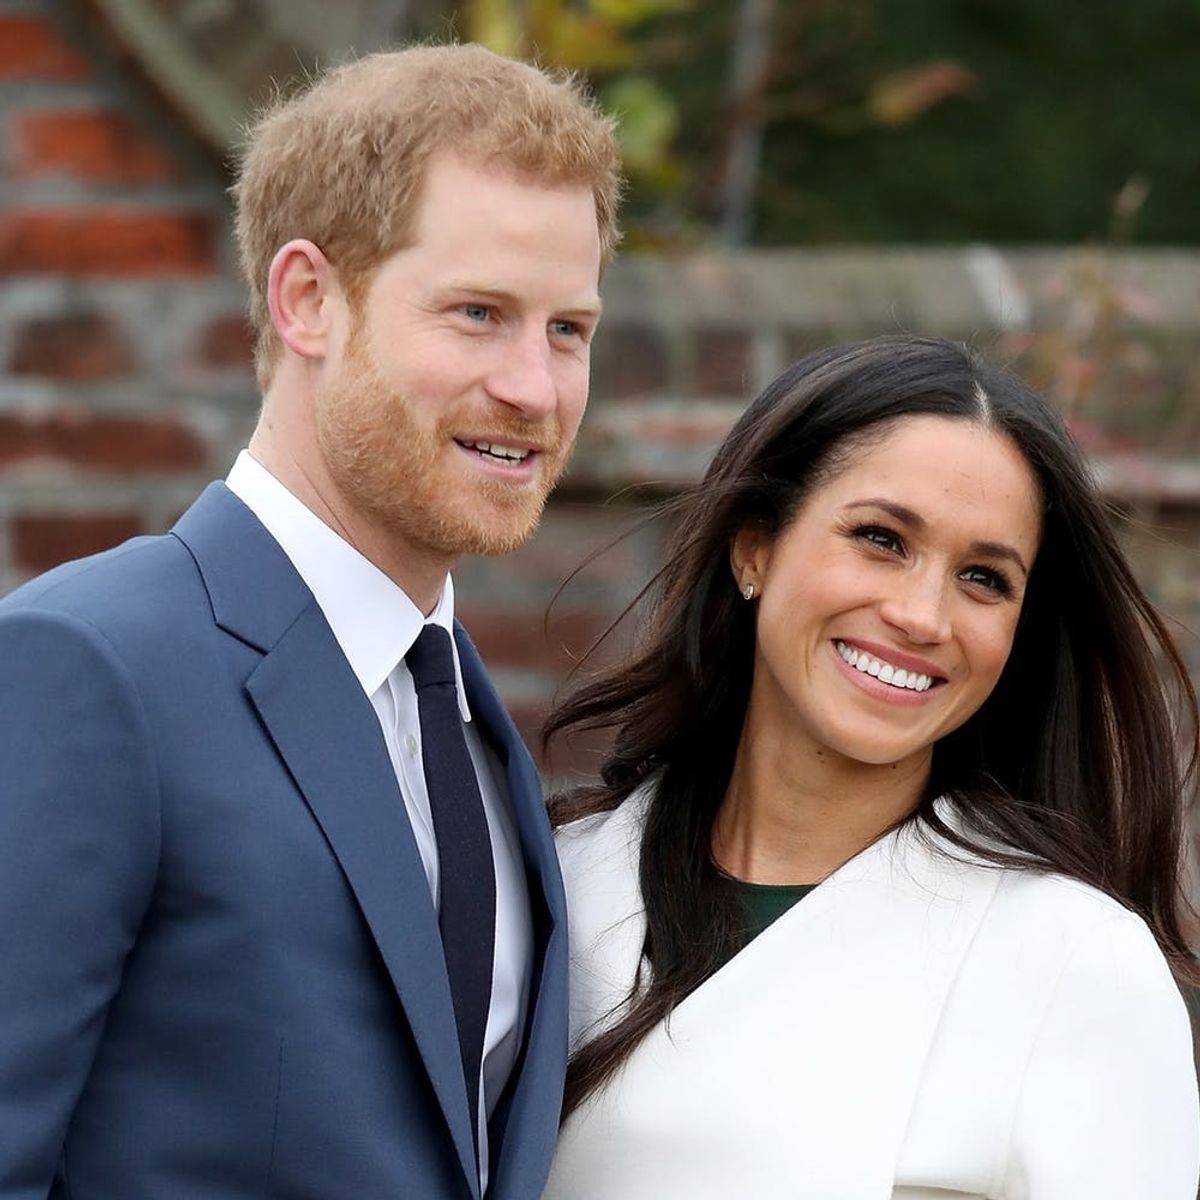 This Is What Prince Harry and Meghan Markle Want Instead of Wedding Gifts